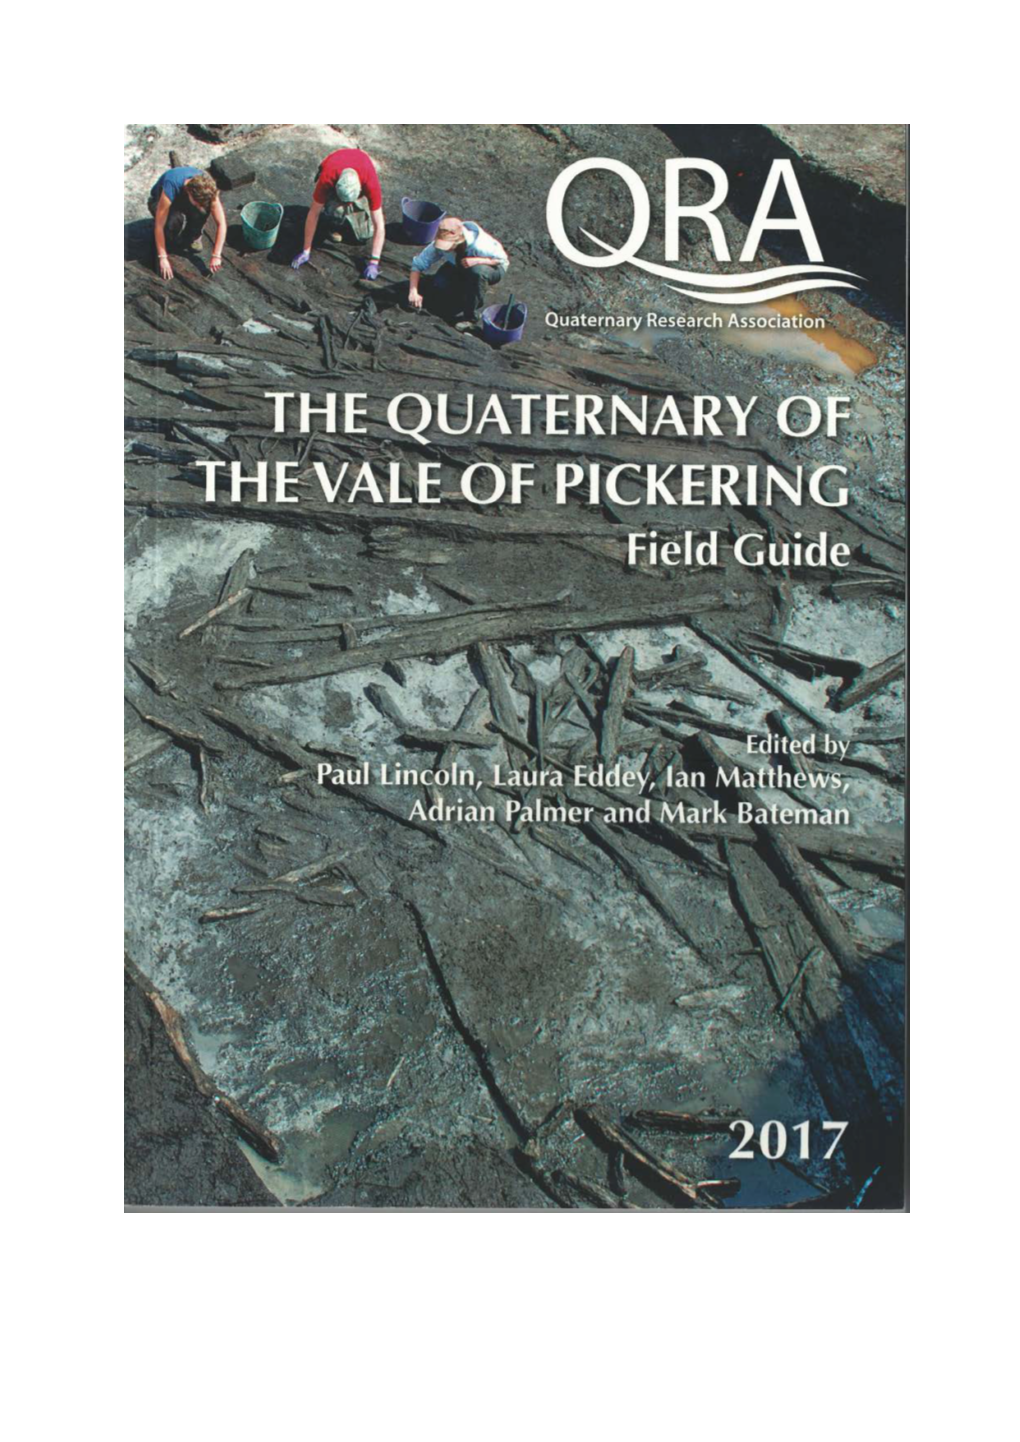 The Quaternary of the Vale of Pickering Field Guide Edited By